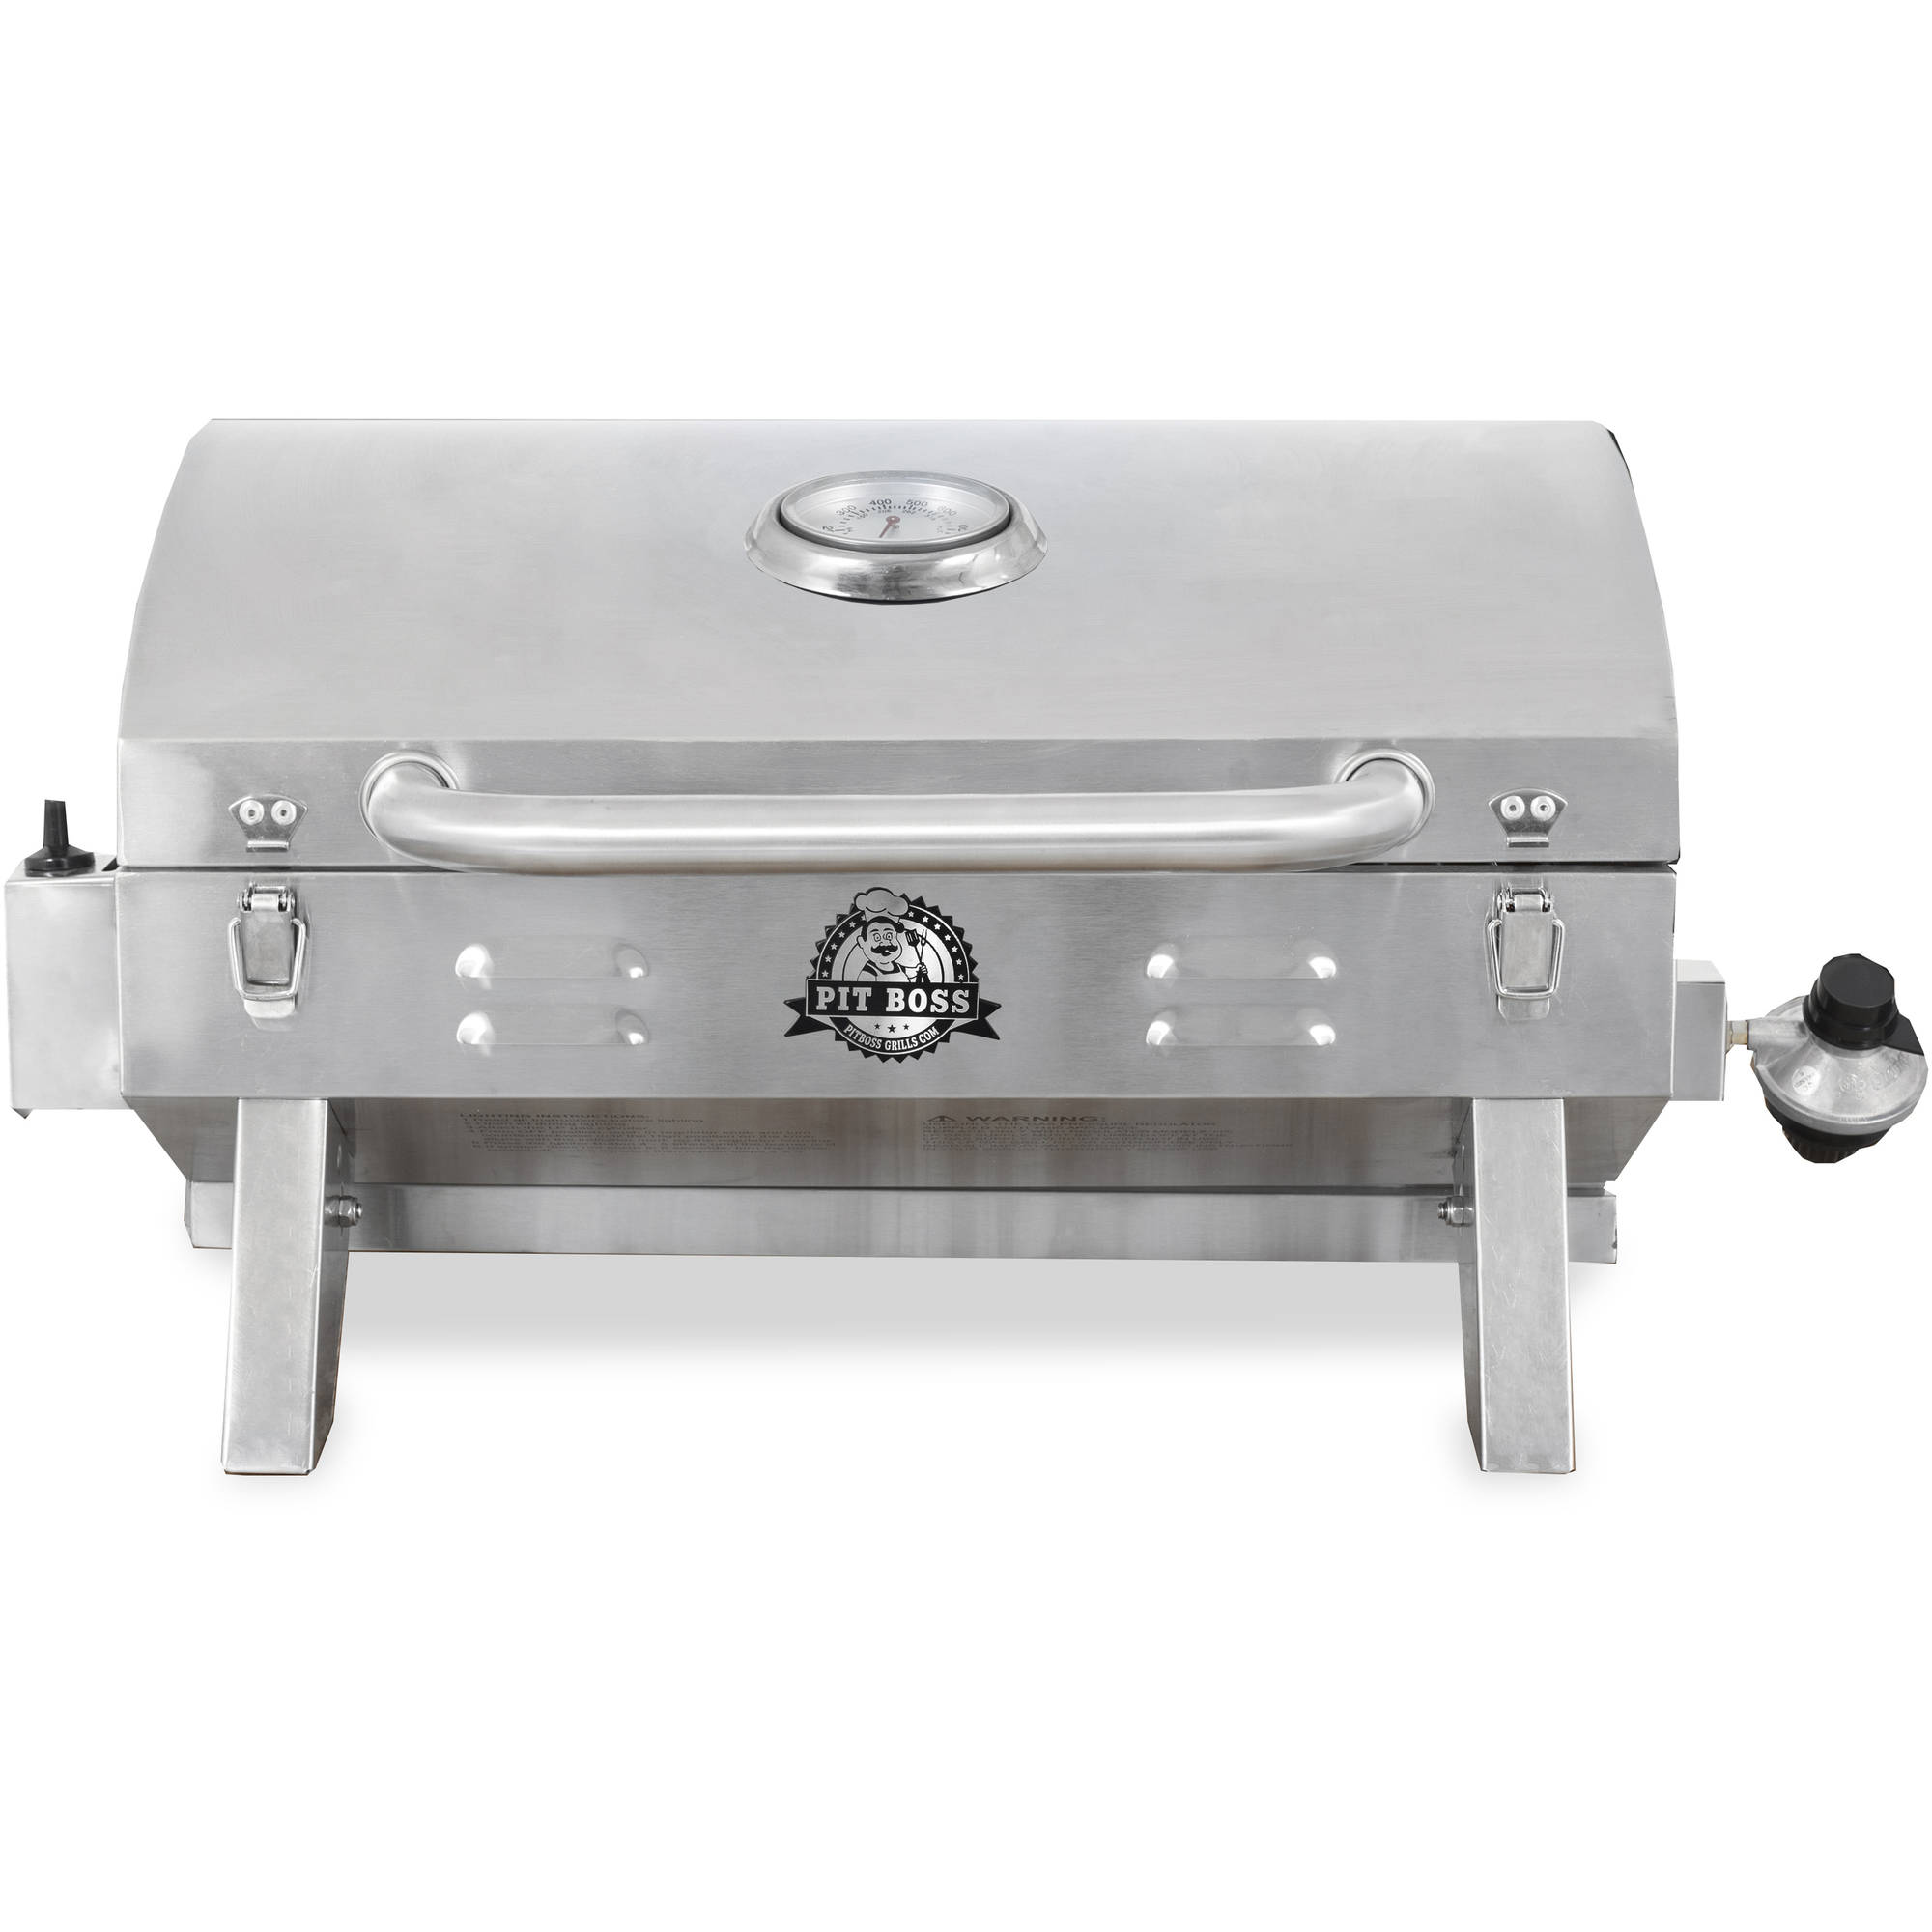 Pit Boss 305 sq in Stainless Steel Portable Grill - image 1 of 10